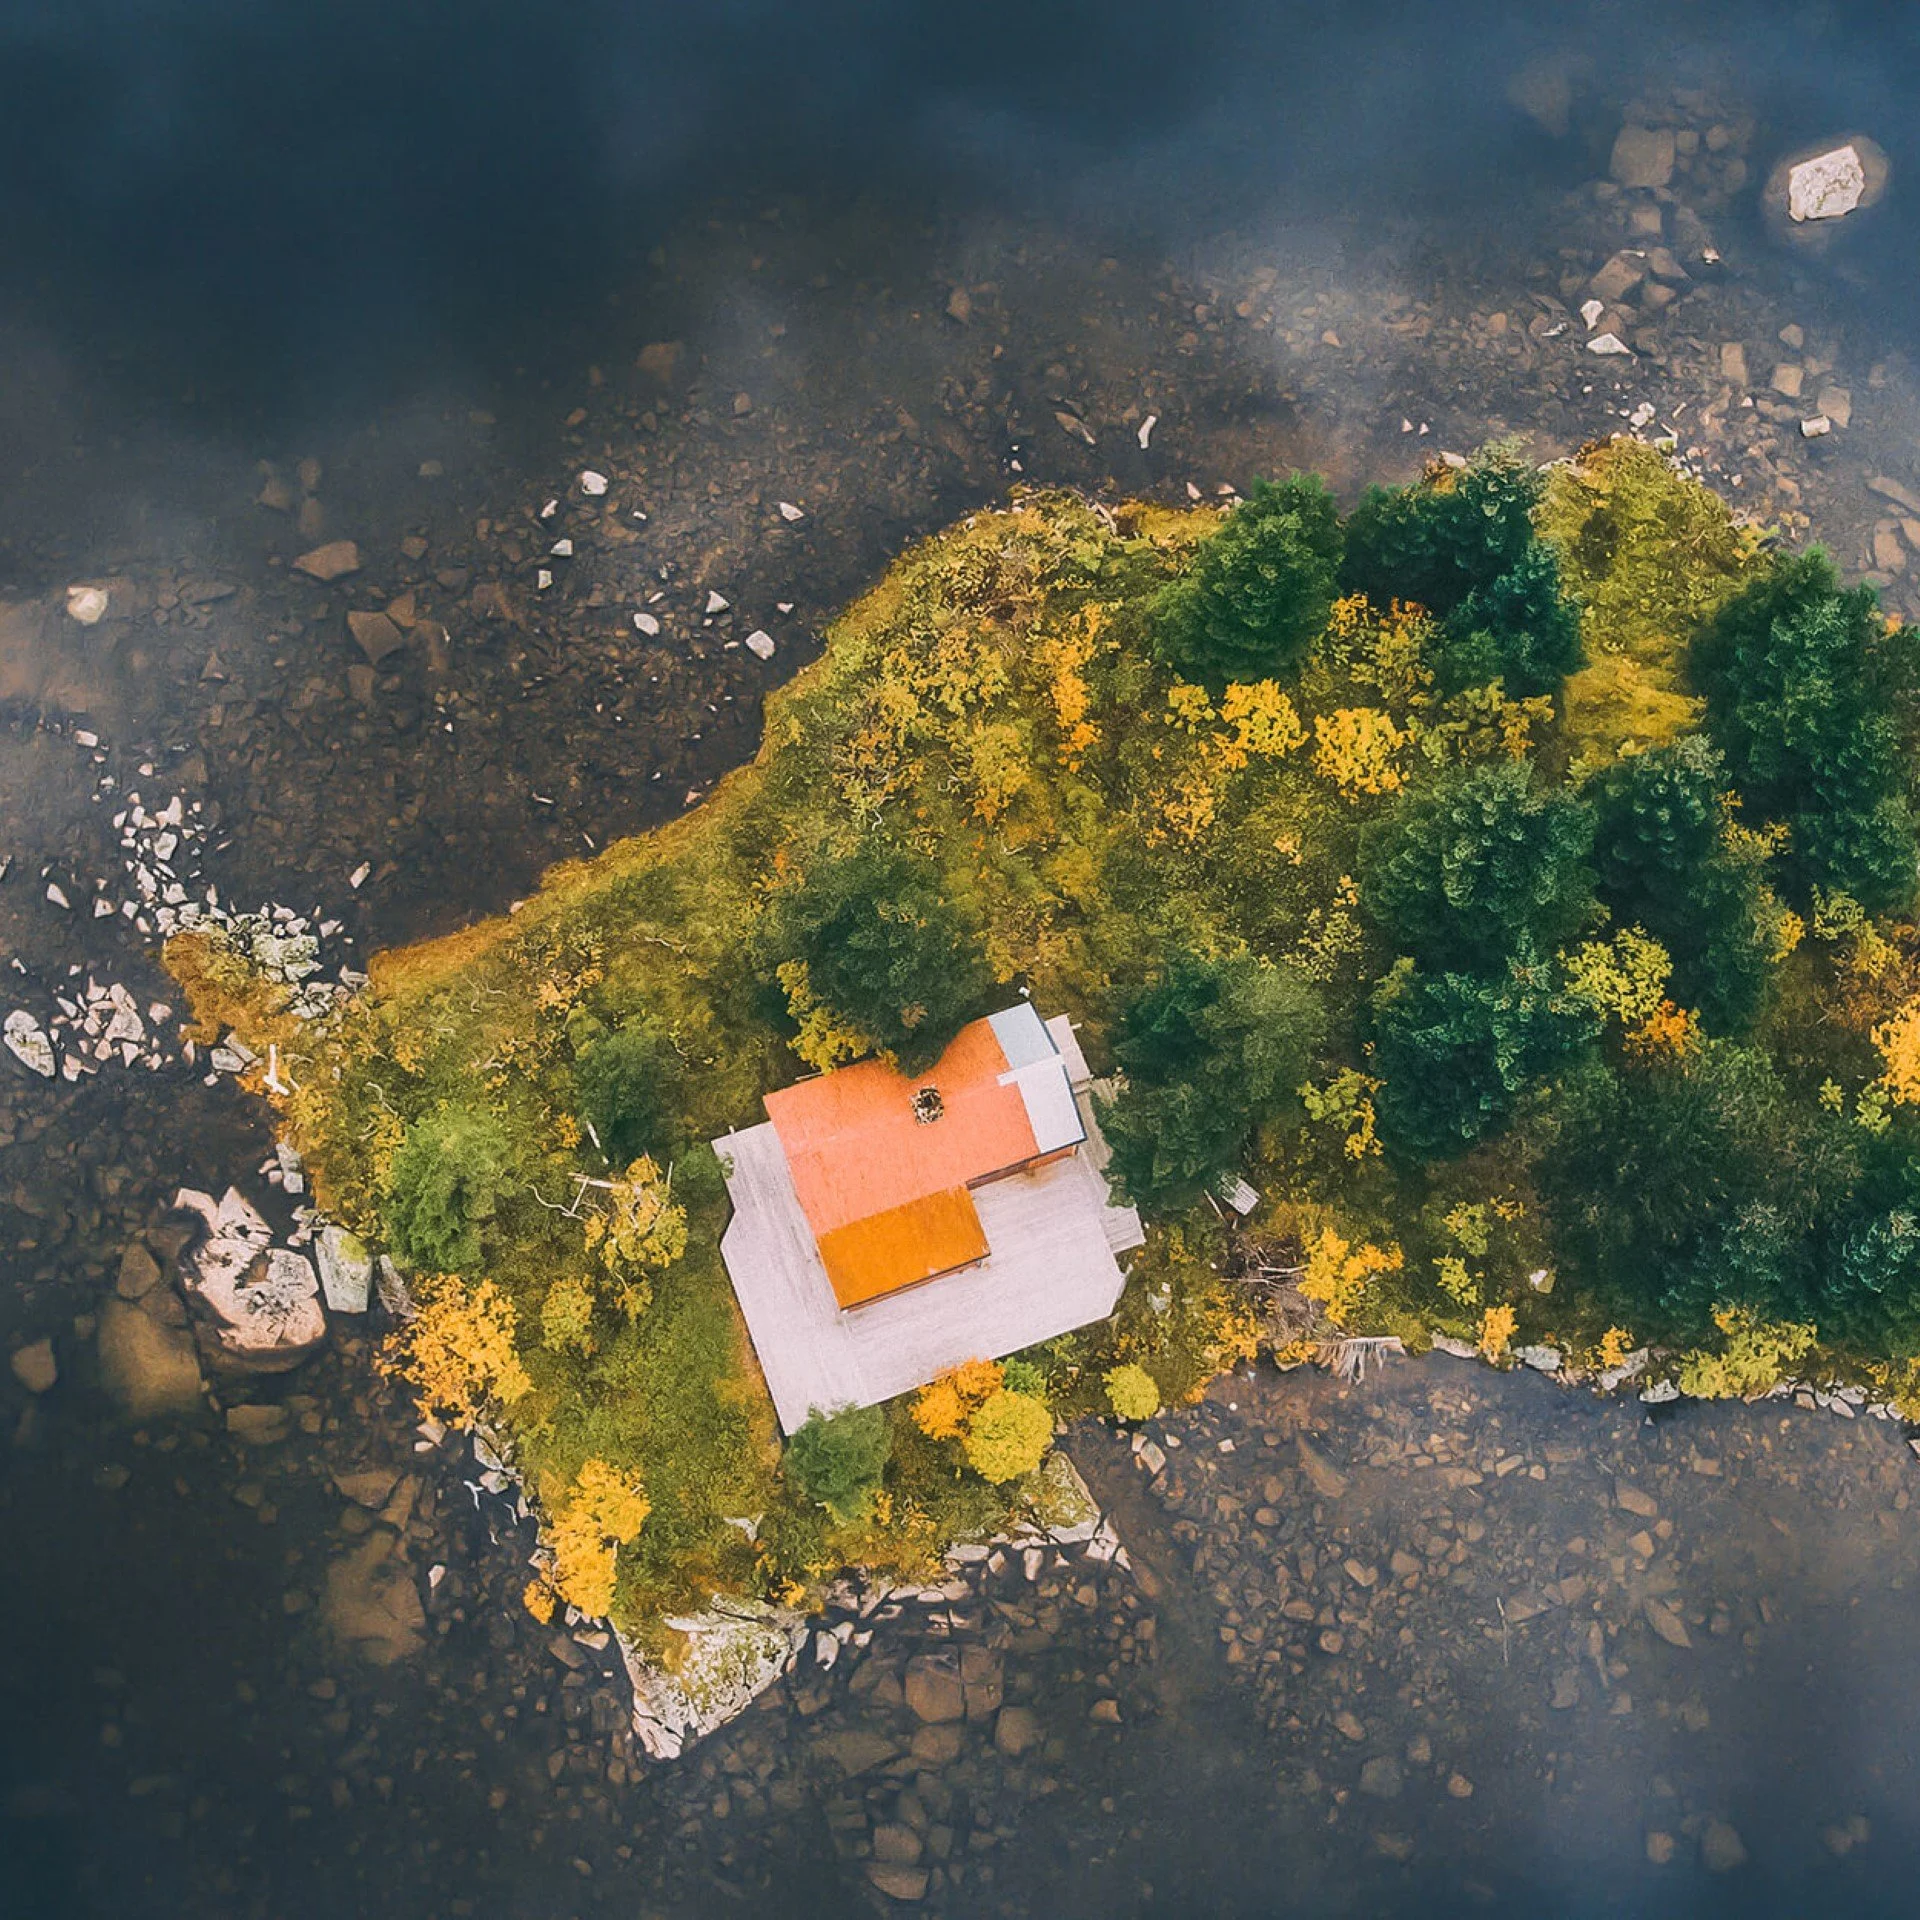 Island seen from above, a drone photo. Lots of trees and one house with orange roof